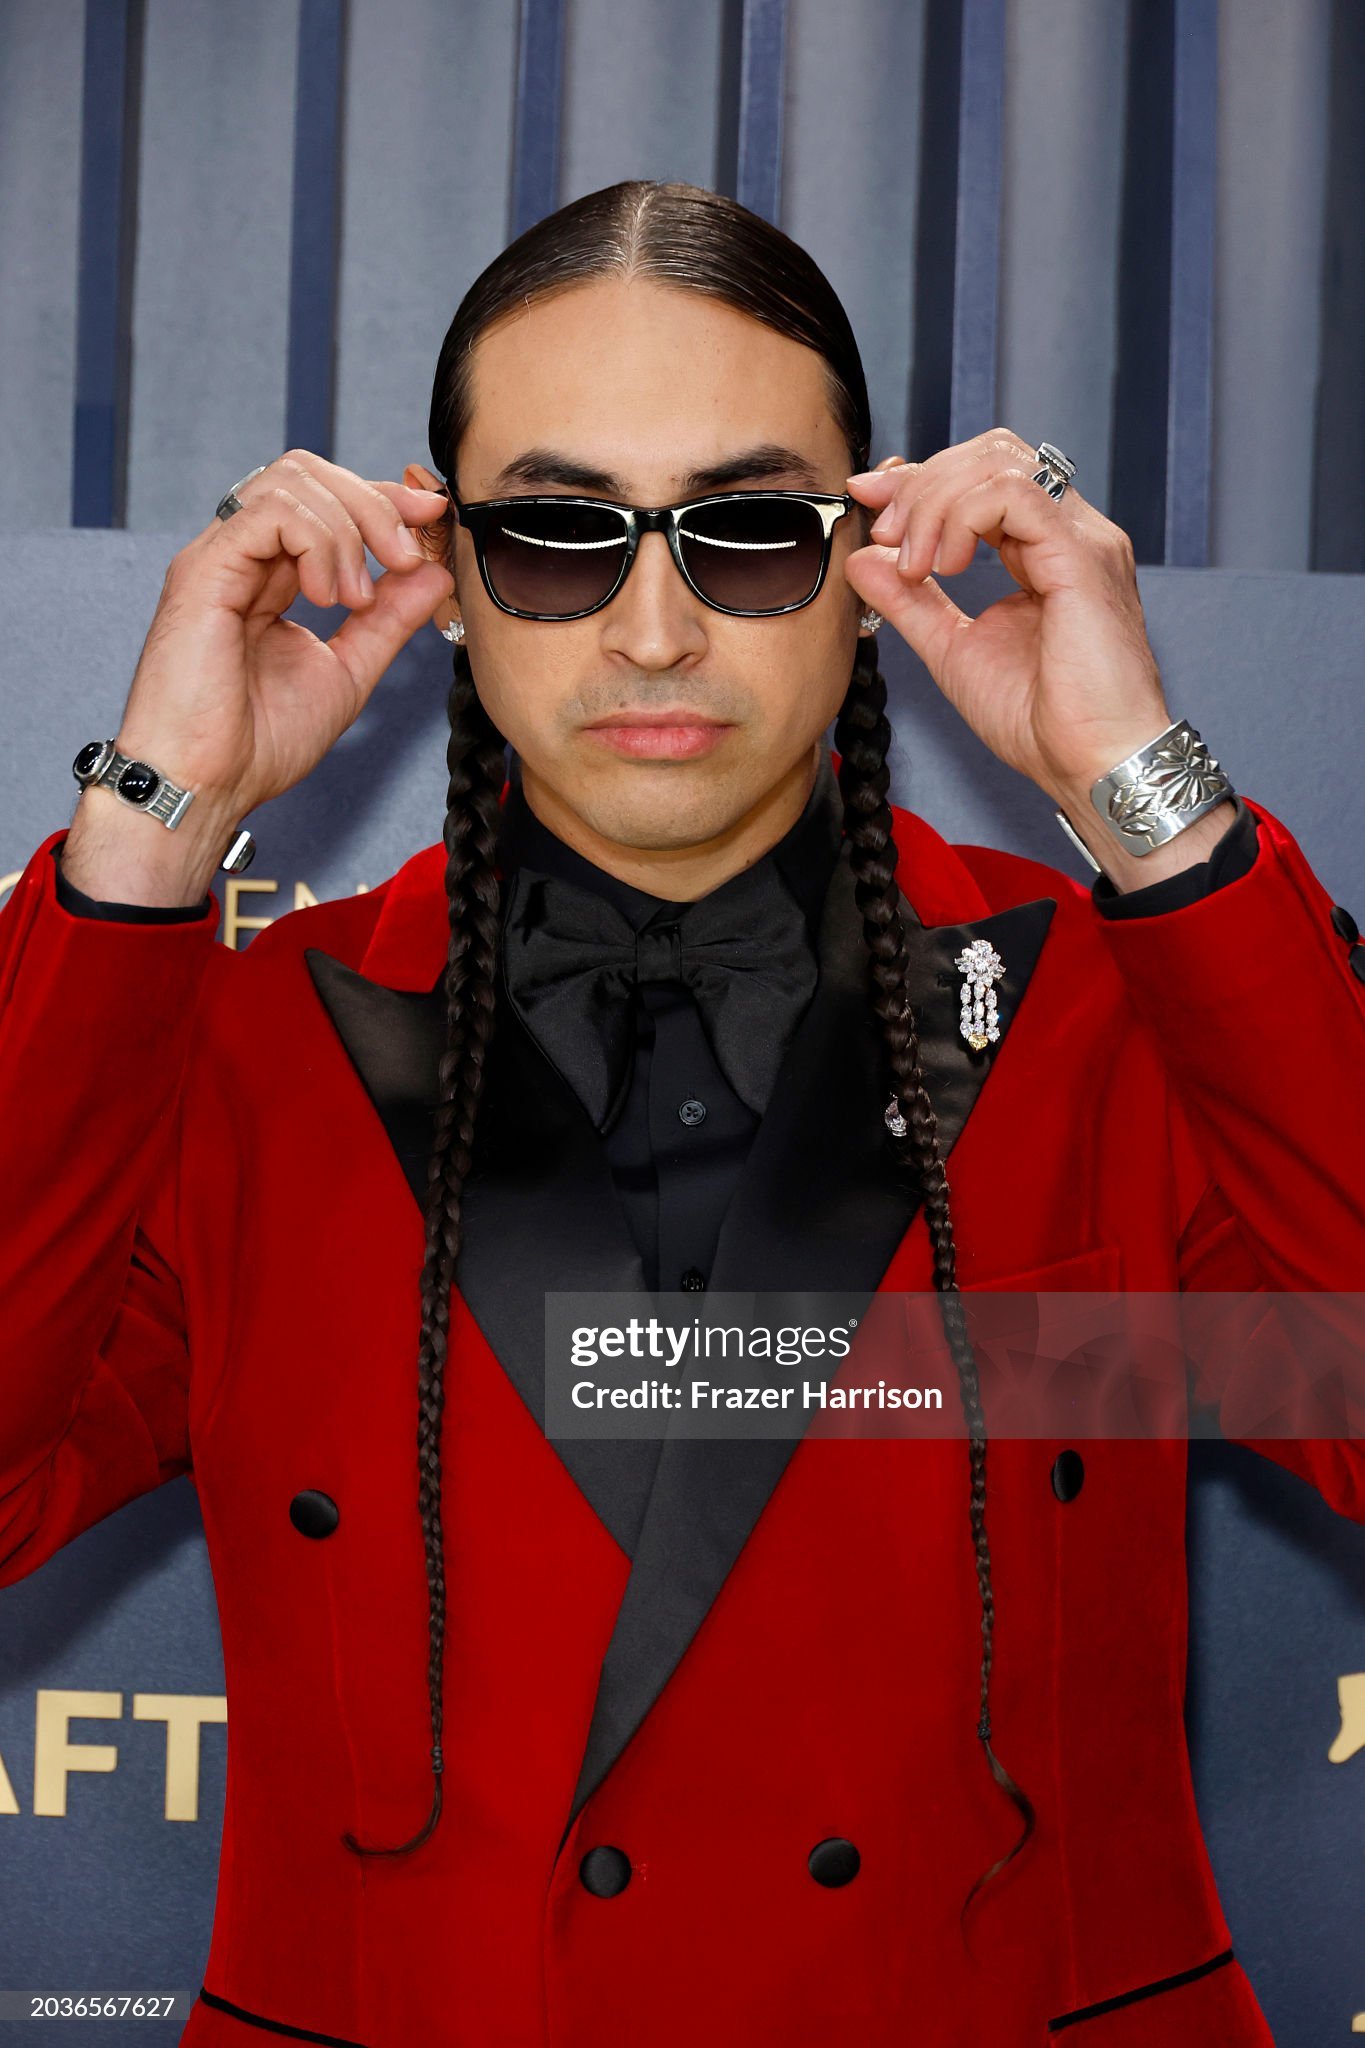 gettyimages-2036567627-2048x2048.jpg